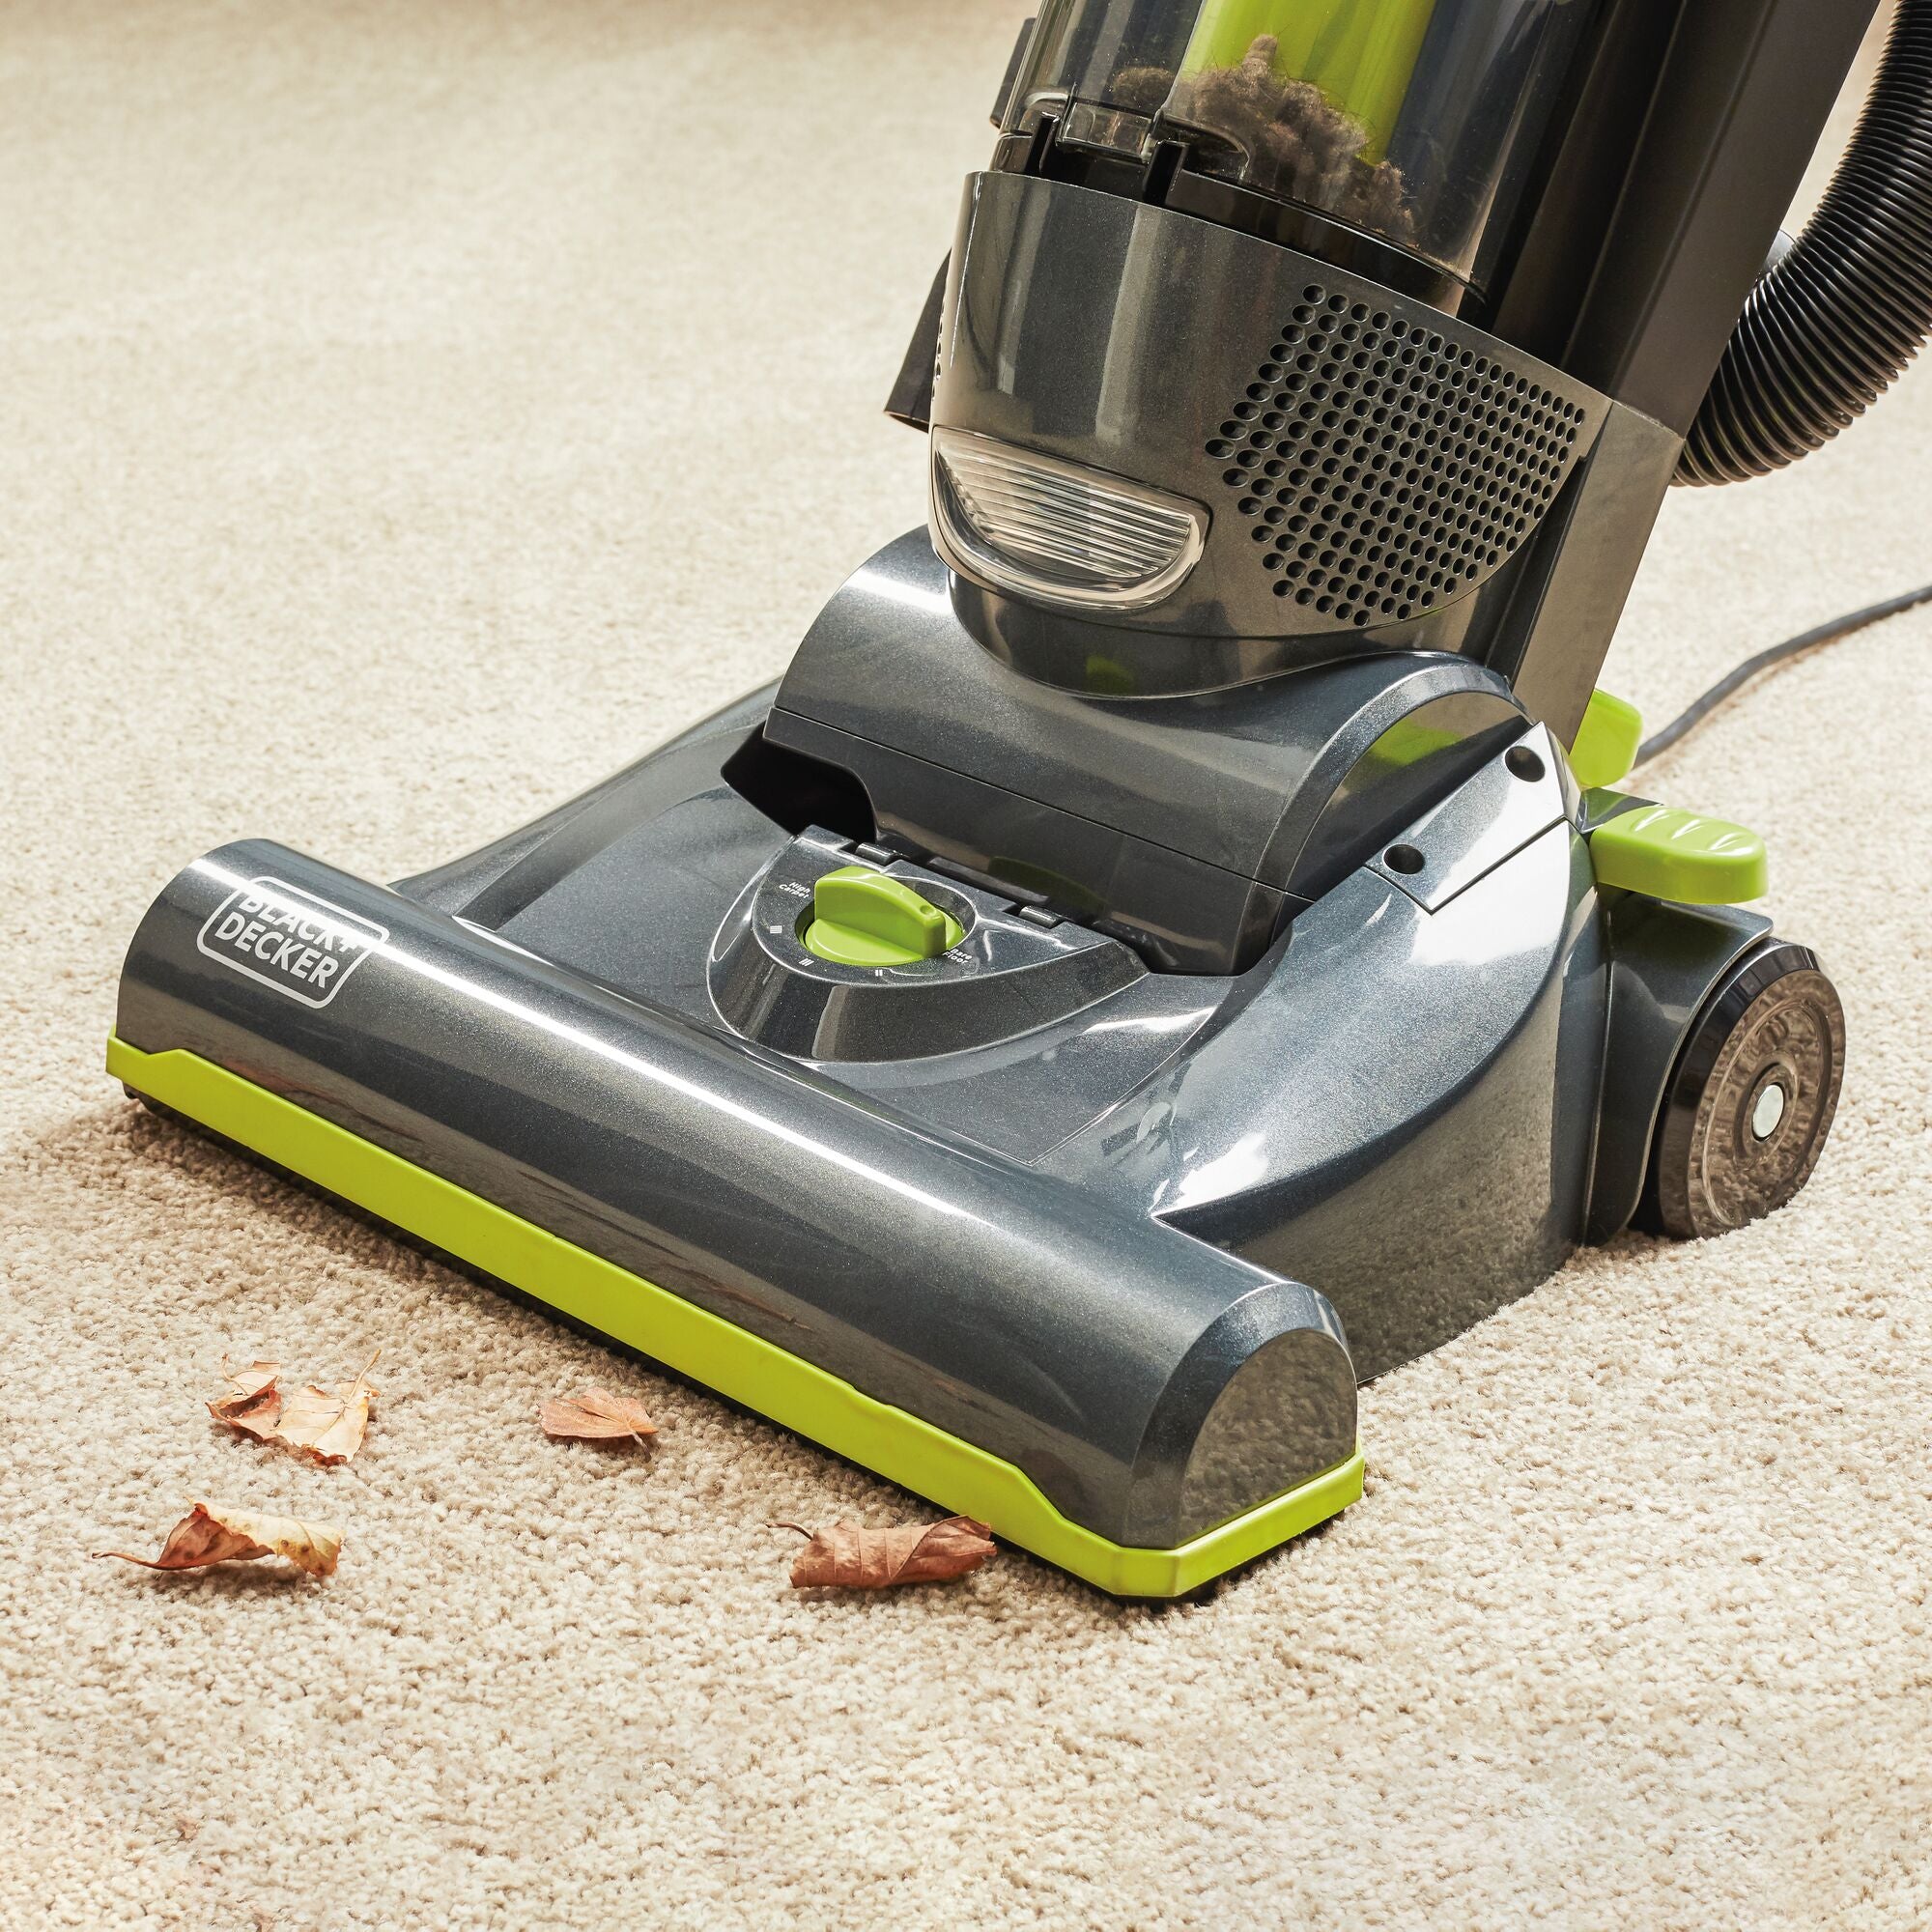 BLACK+DECKER Upright Vacuum with Anti-Allergen Hepa Filter sucking the trash from the white carpet.